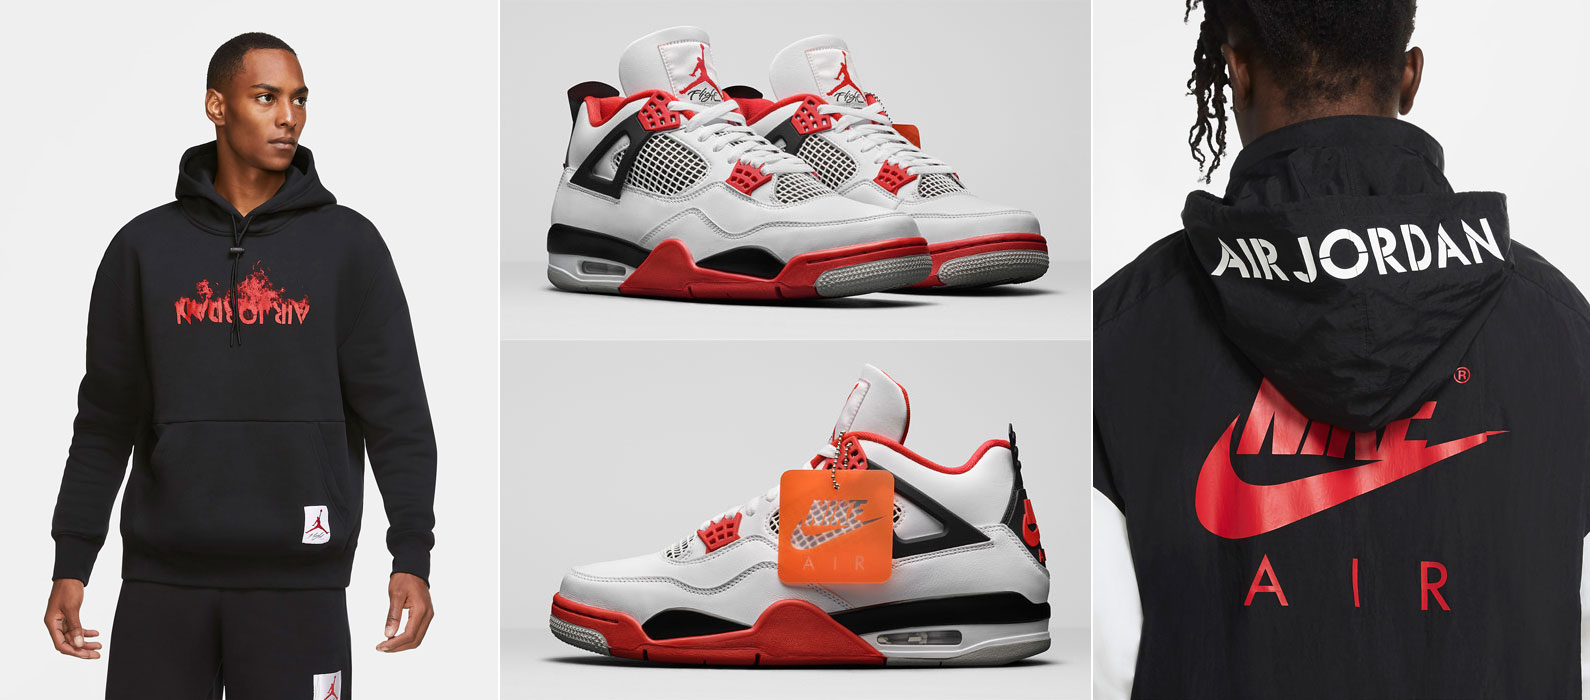 fire red 4s womens